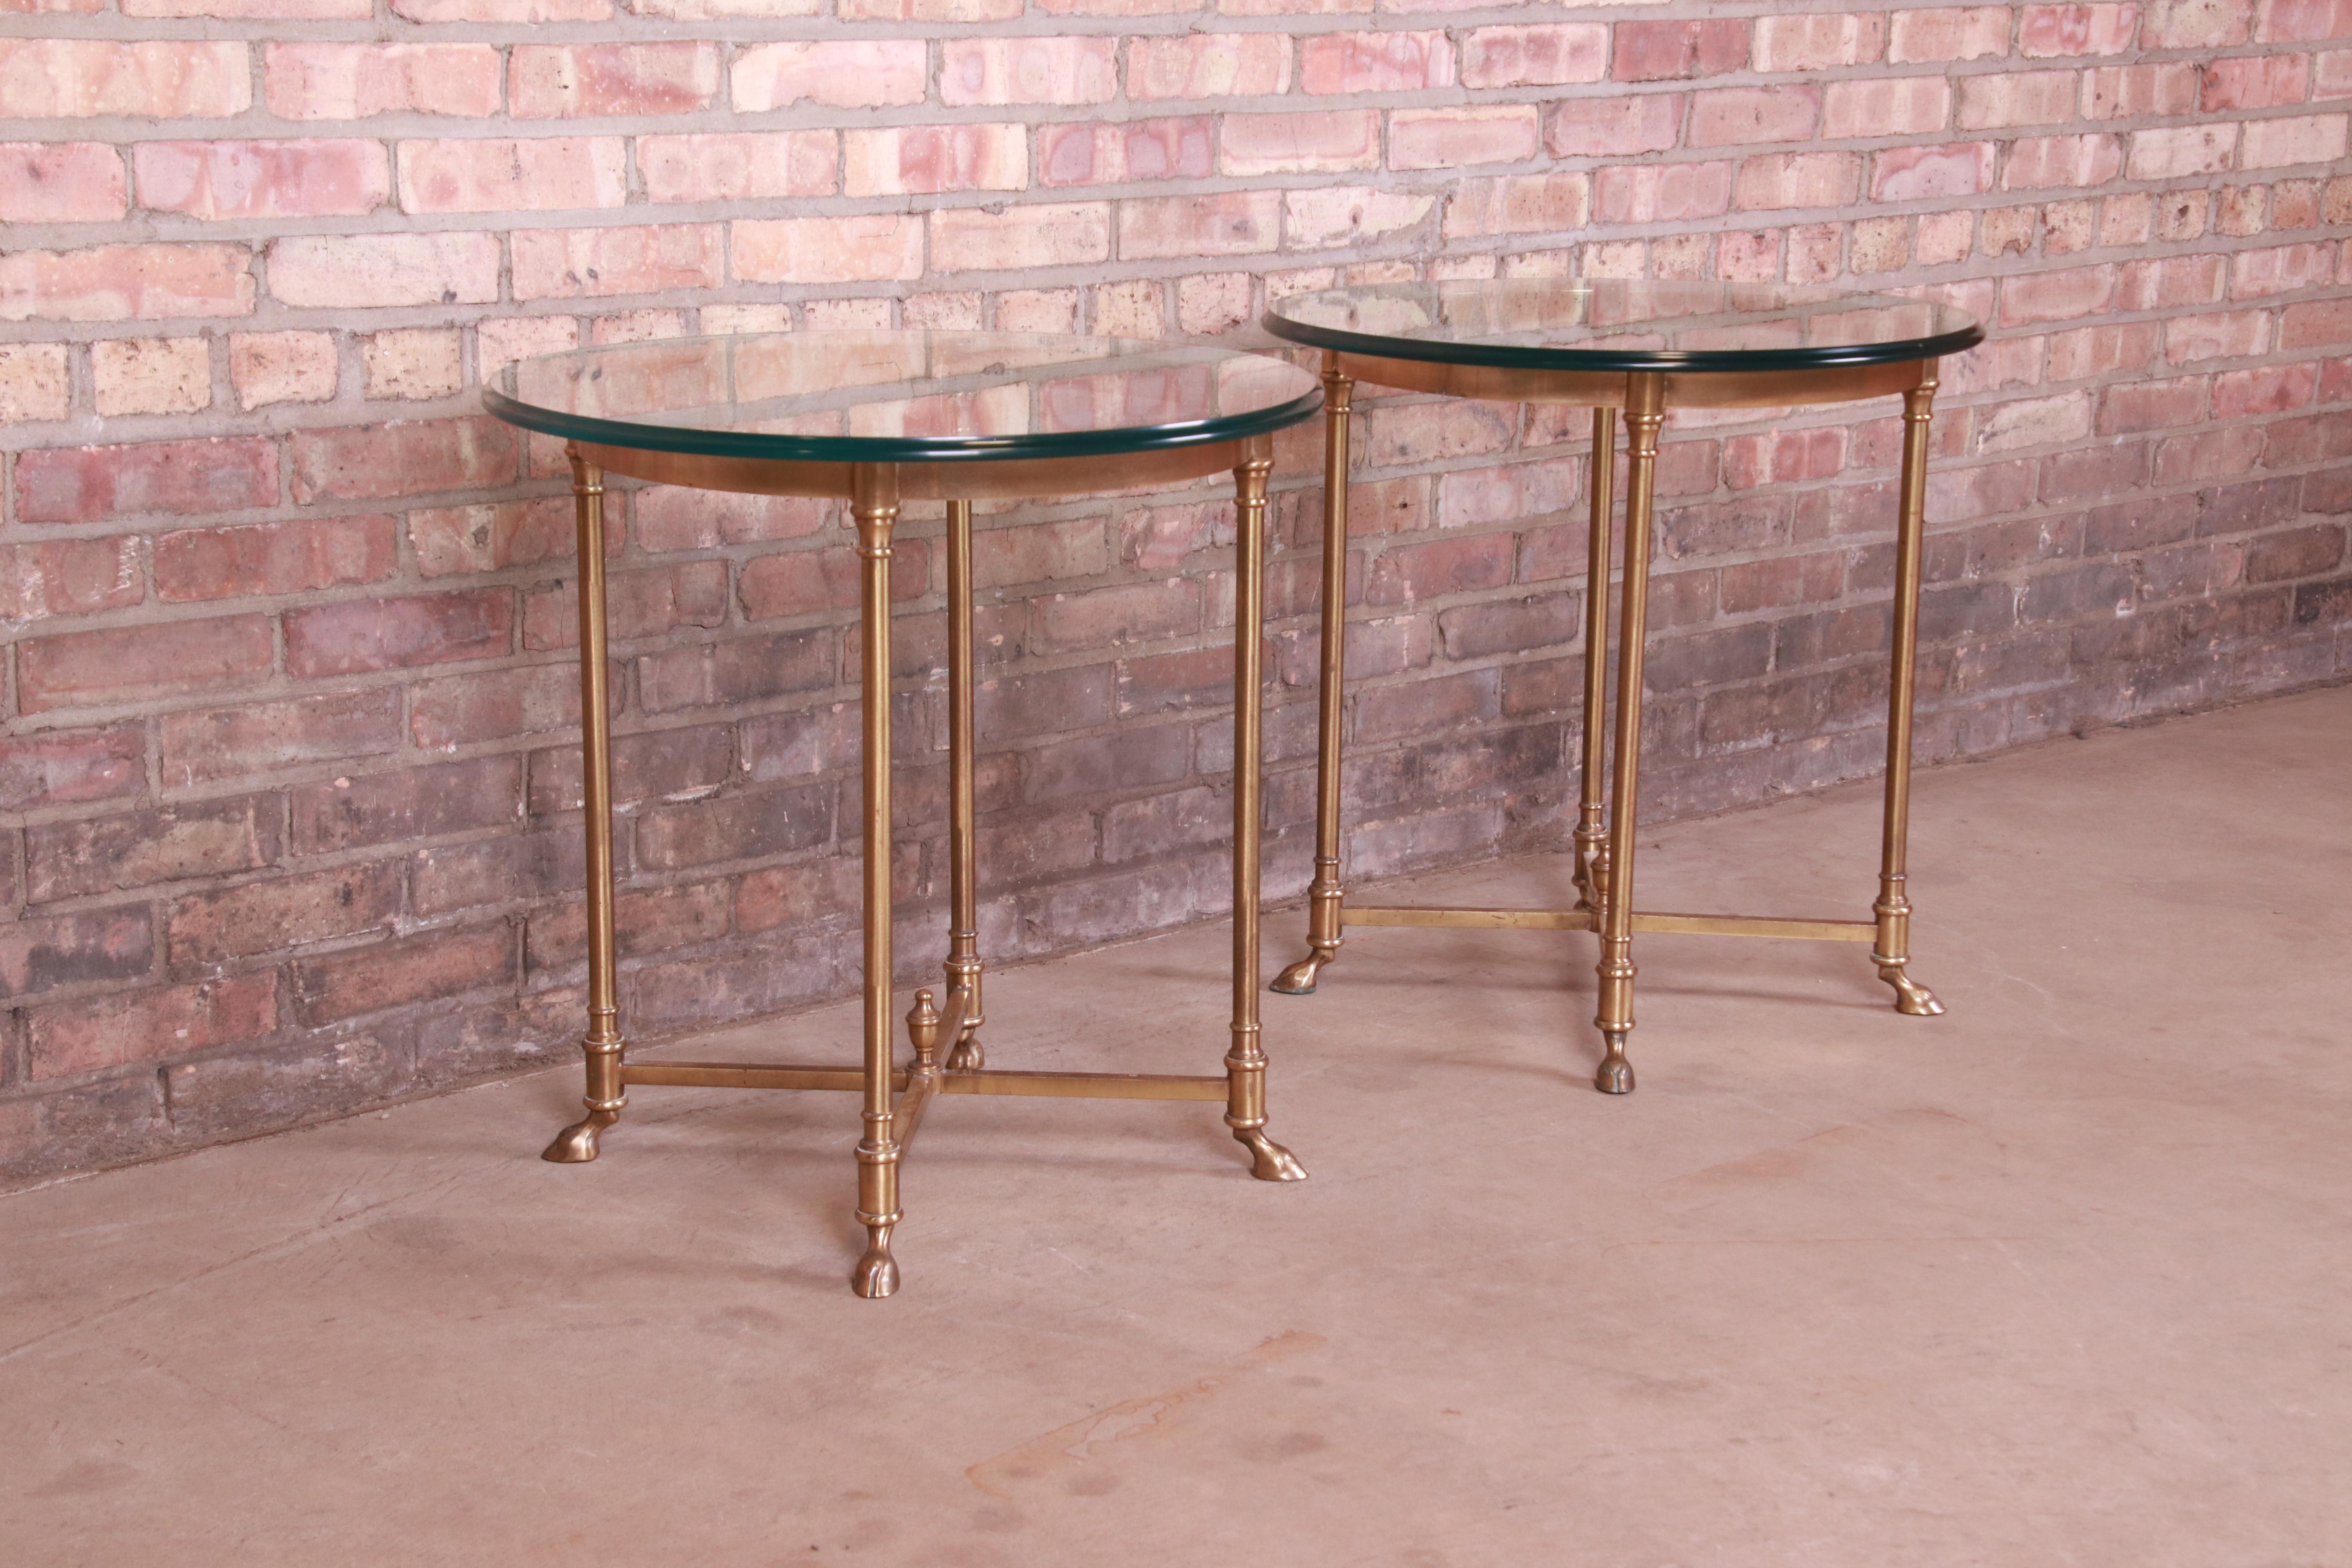 20th Century Labarge Italian Hollywood Regency Brass and Glass Side Tables with Hooved Feet